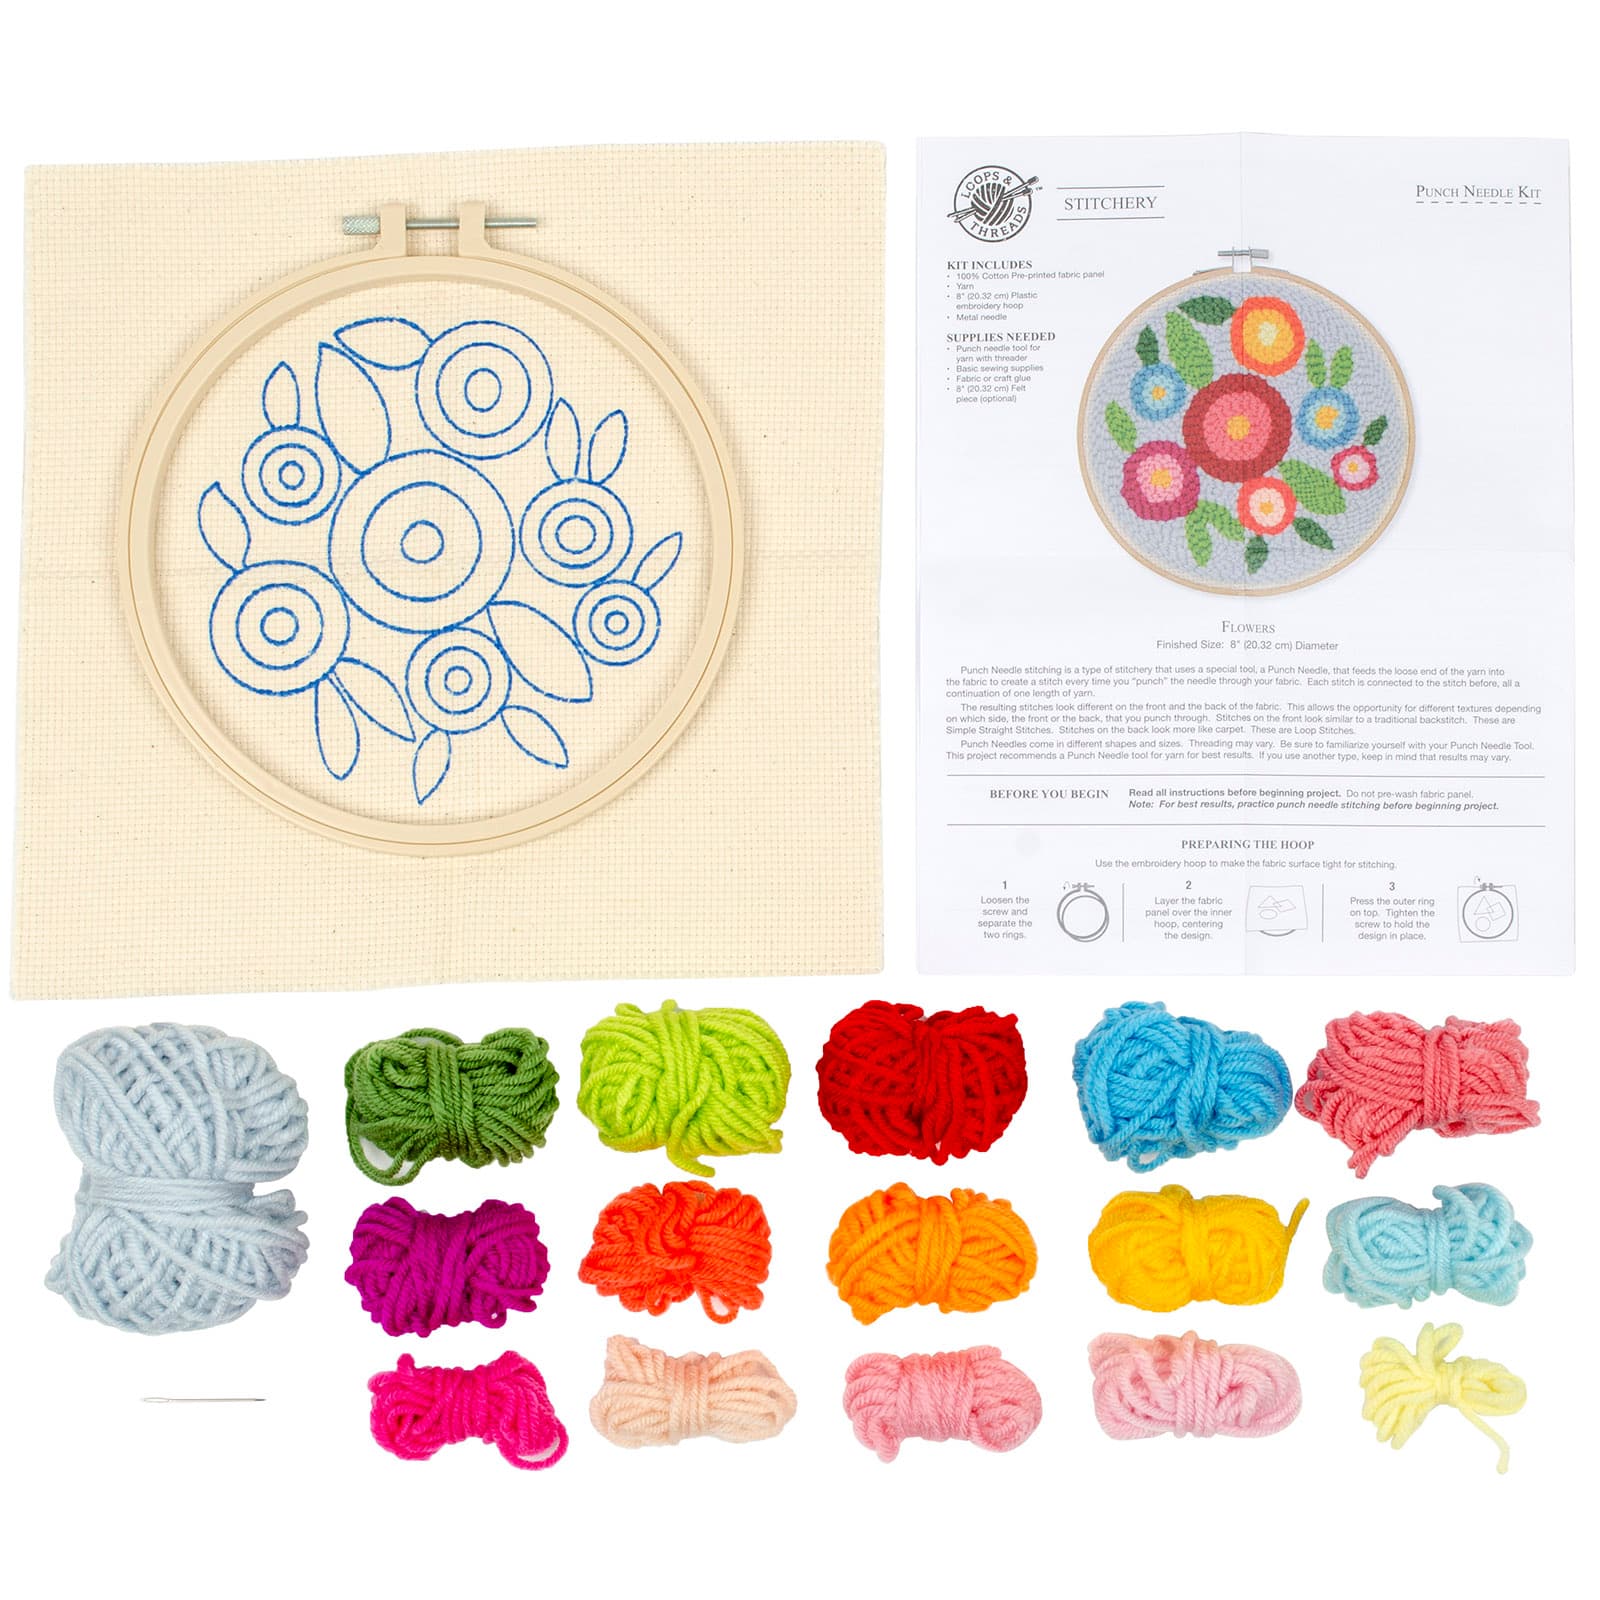 8 Floral Pattern Punch Needle Kit